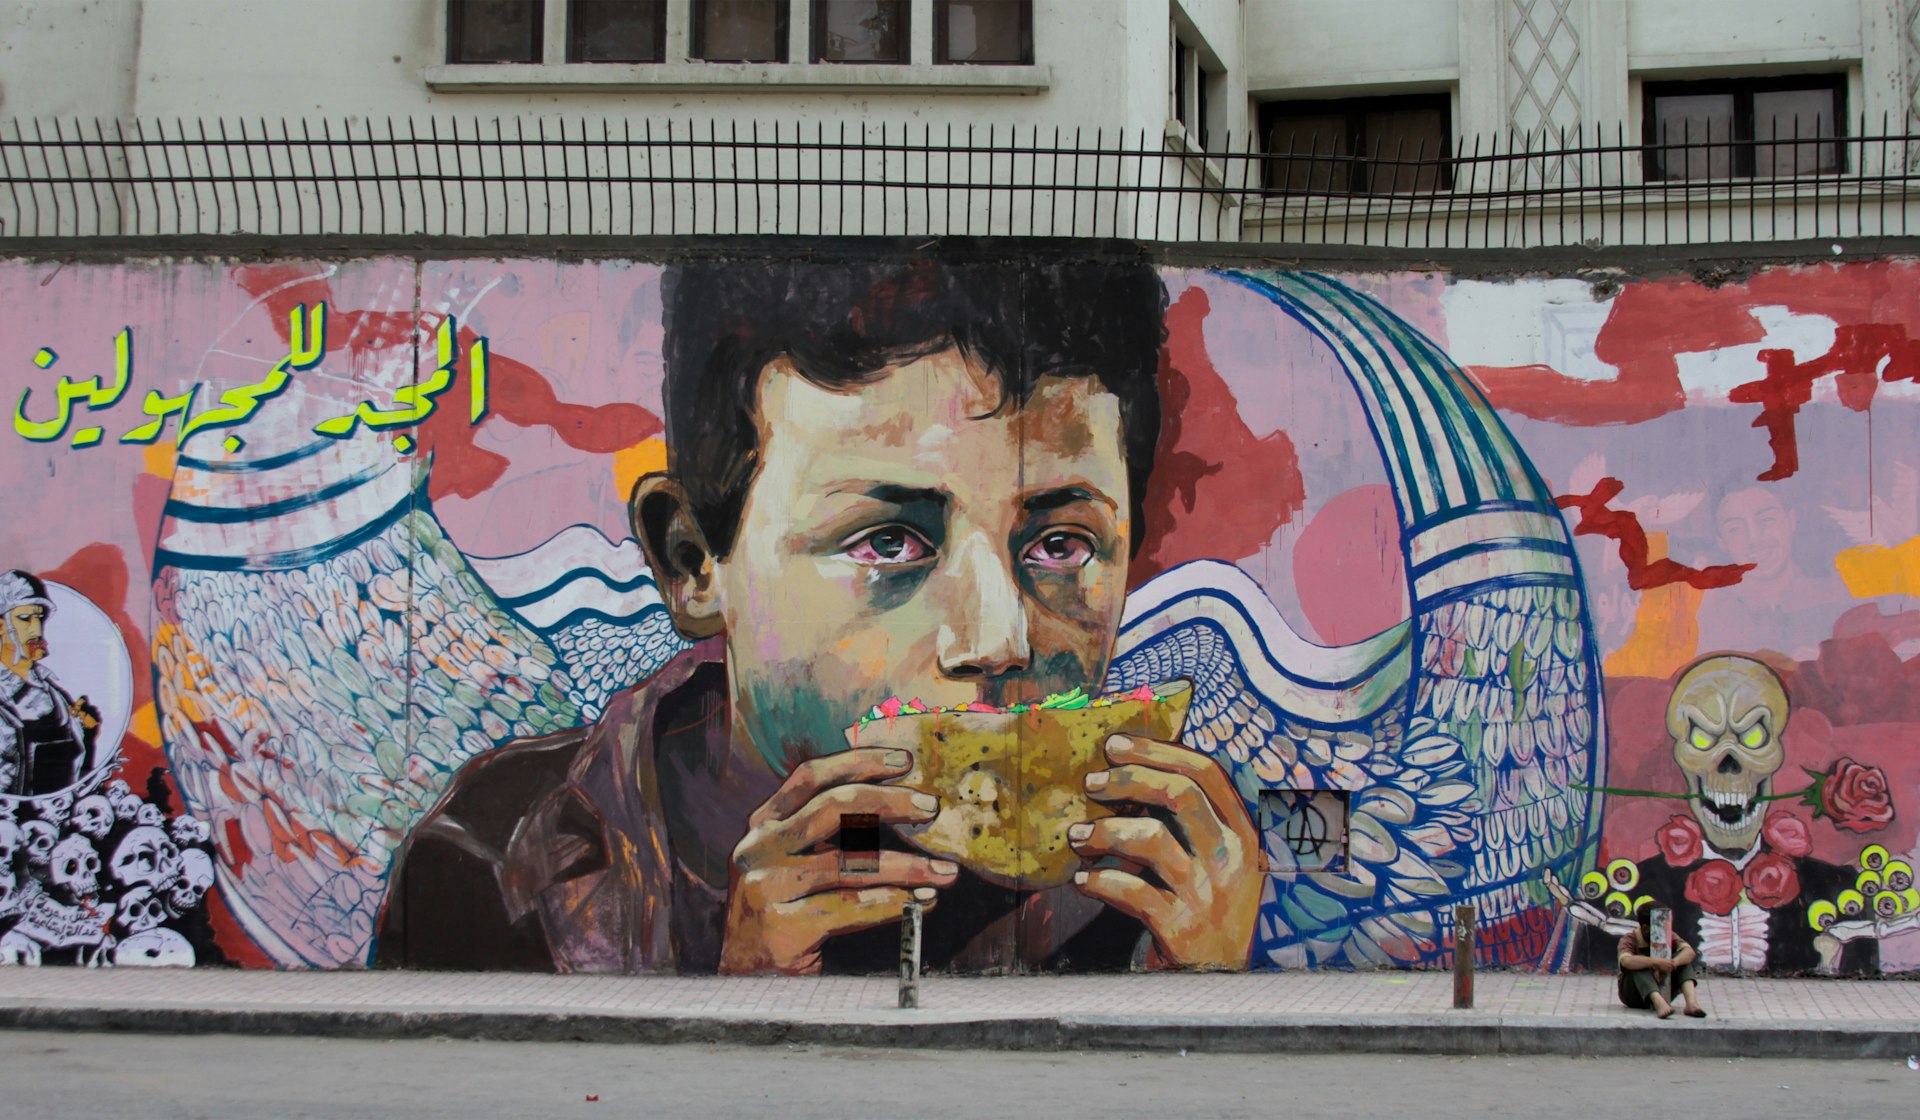 Egypt's revolutionary street artists silenced by new military dictatorship